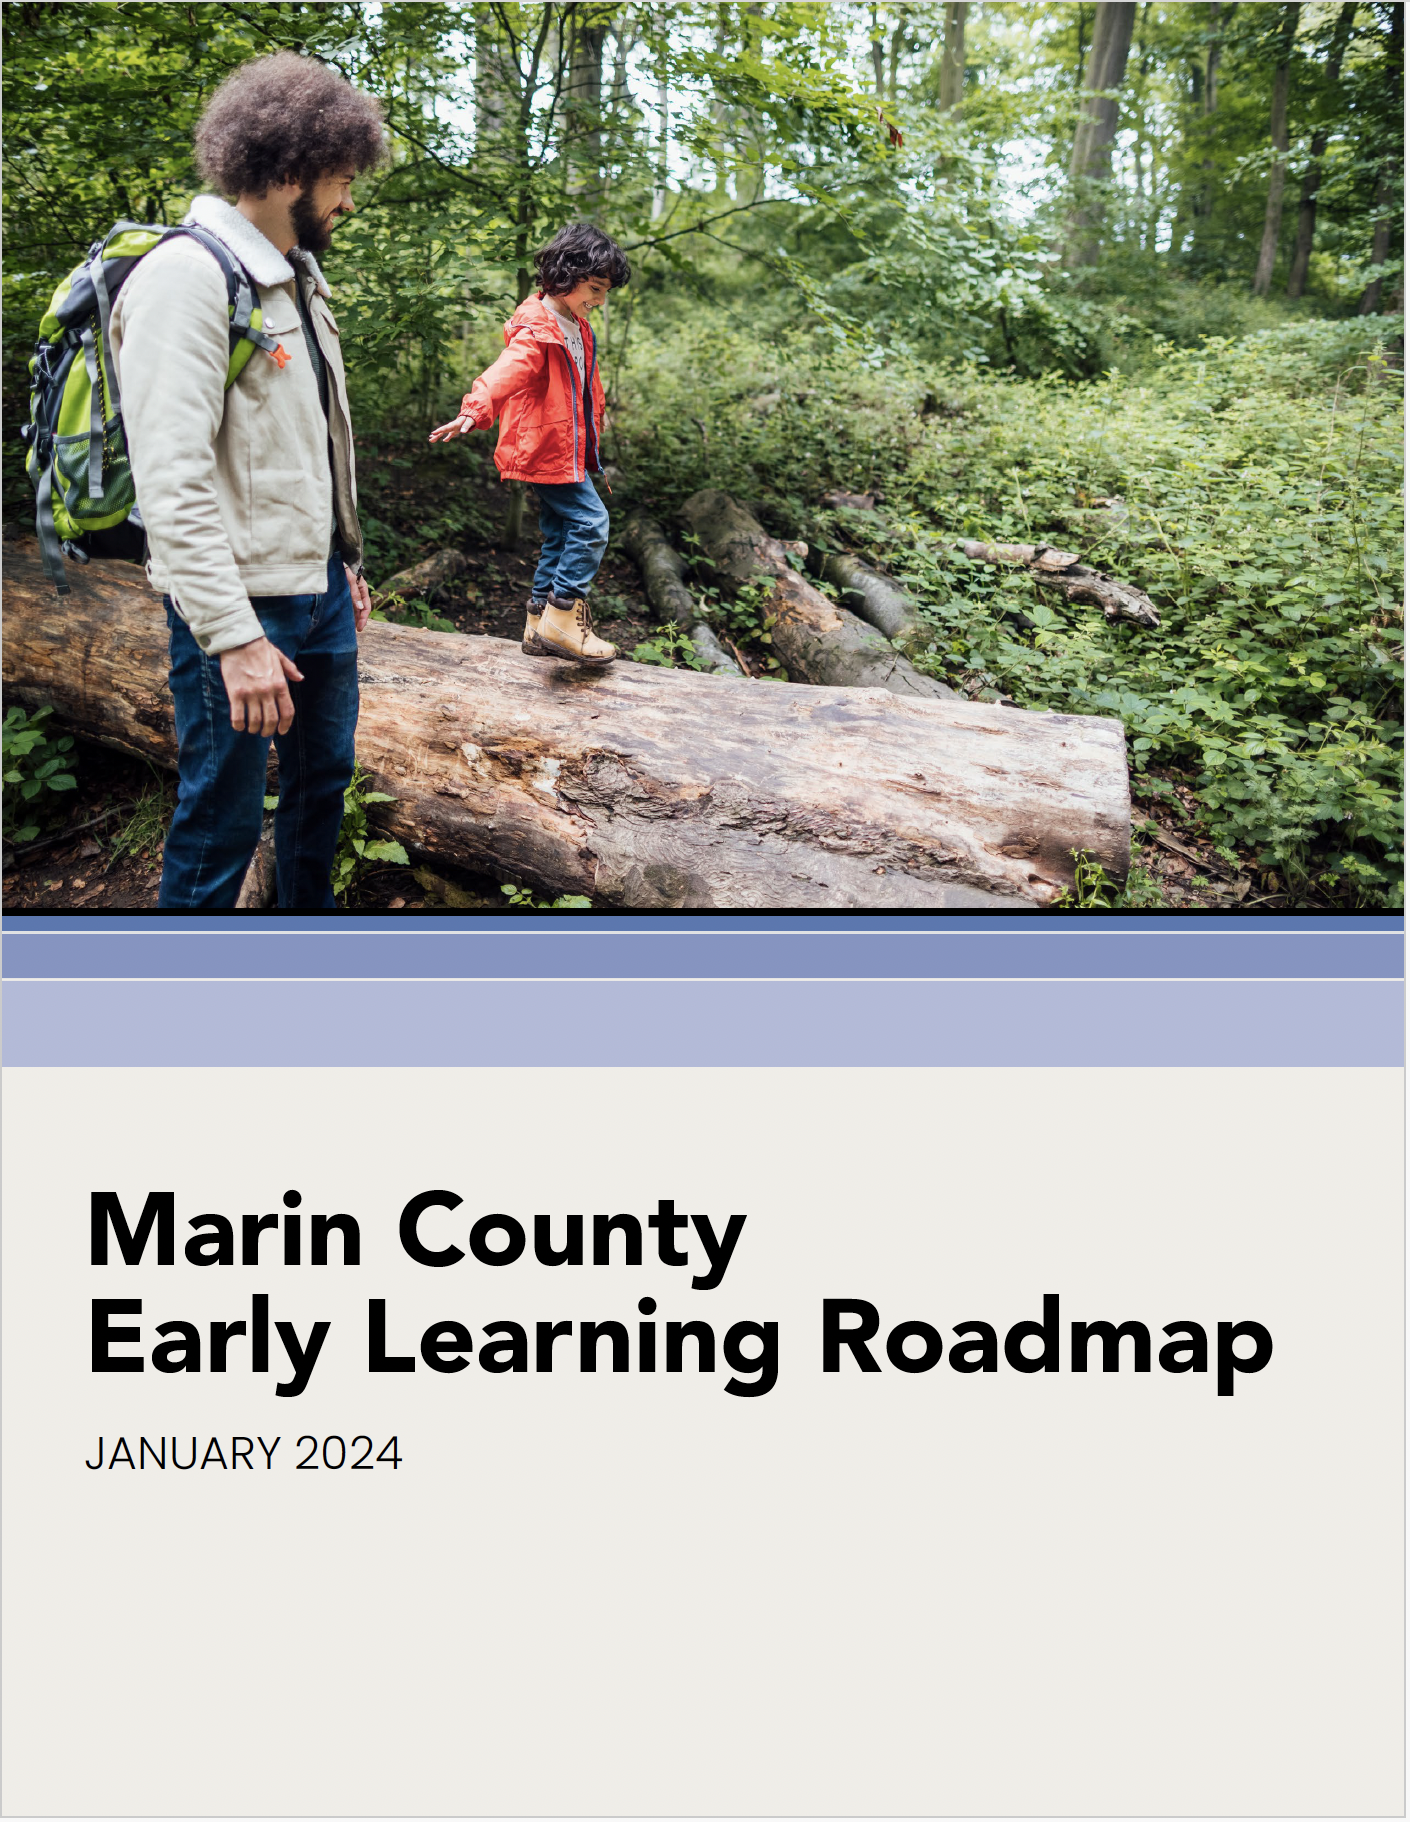 Cover of the Marin County Early Learning Roadmap showing the title and a photo of a father and child on a hike